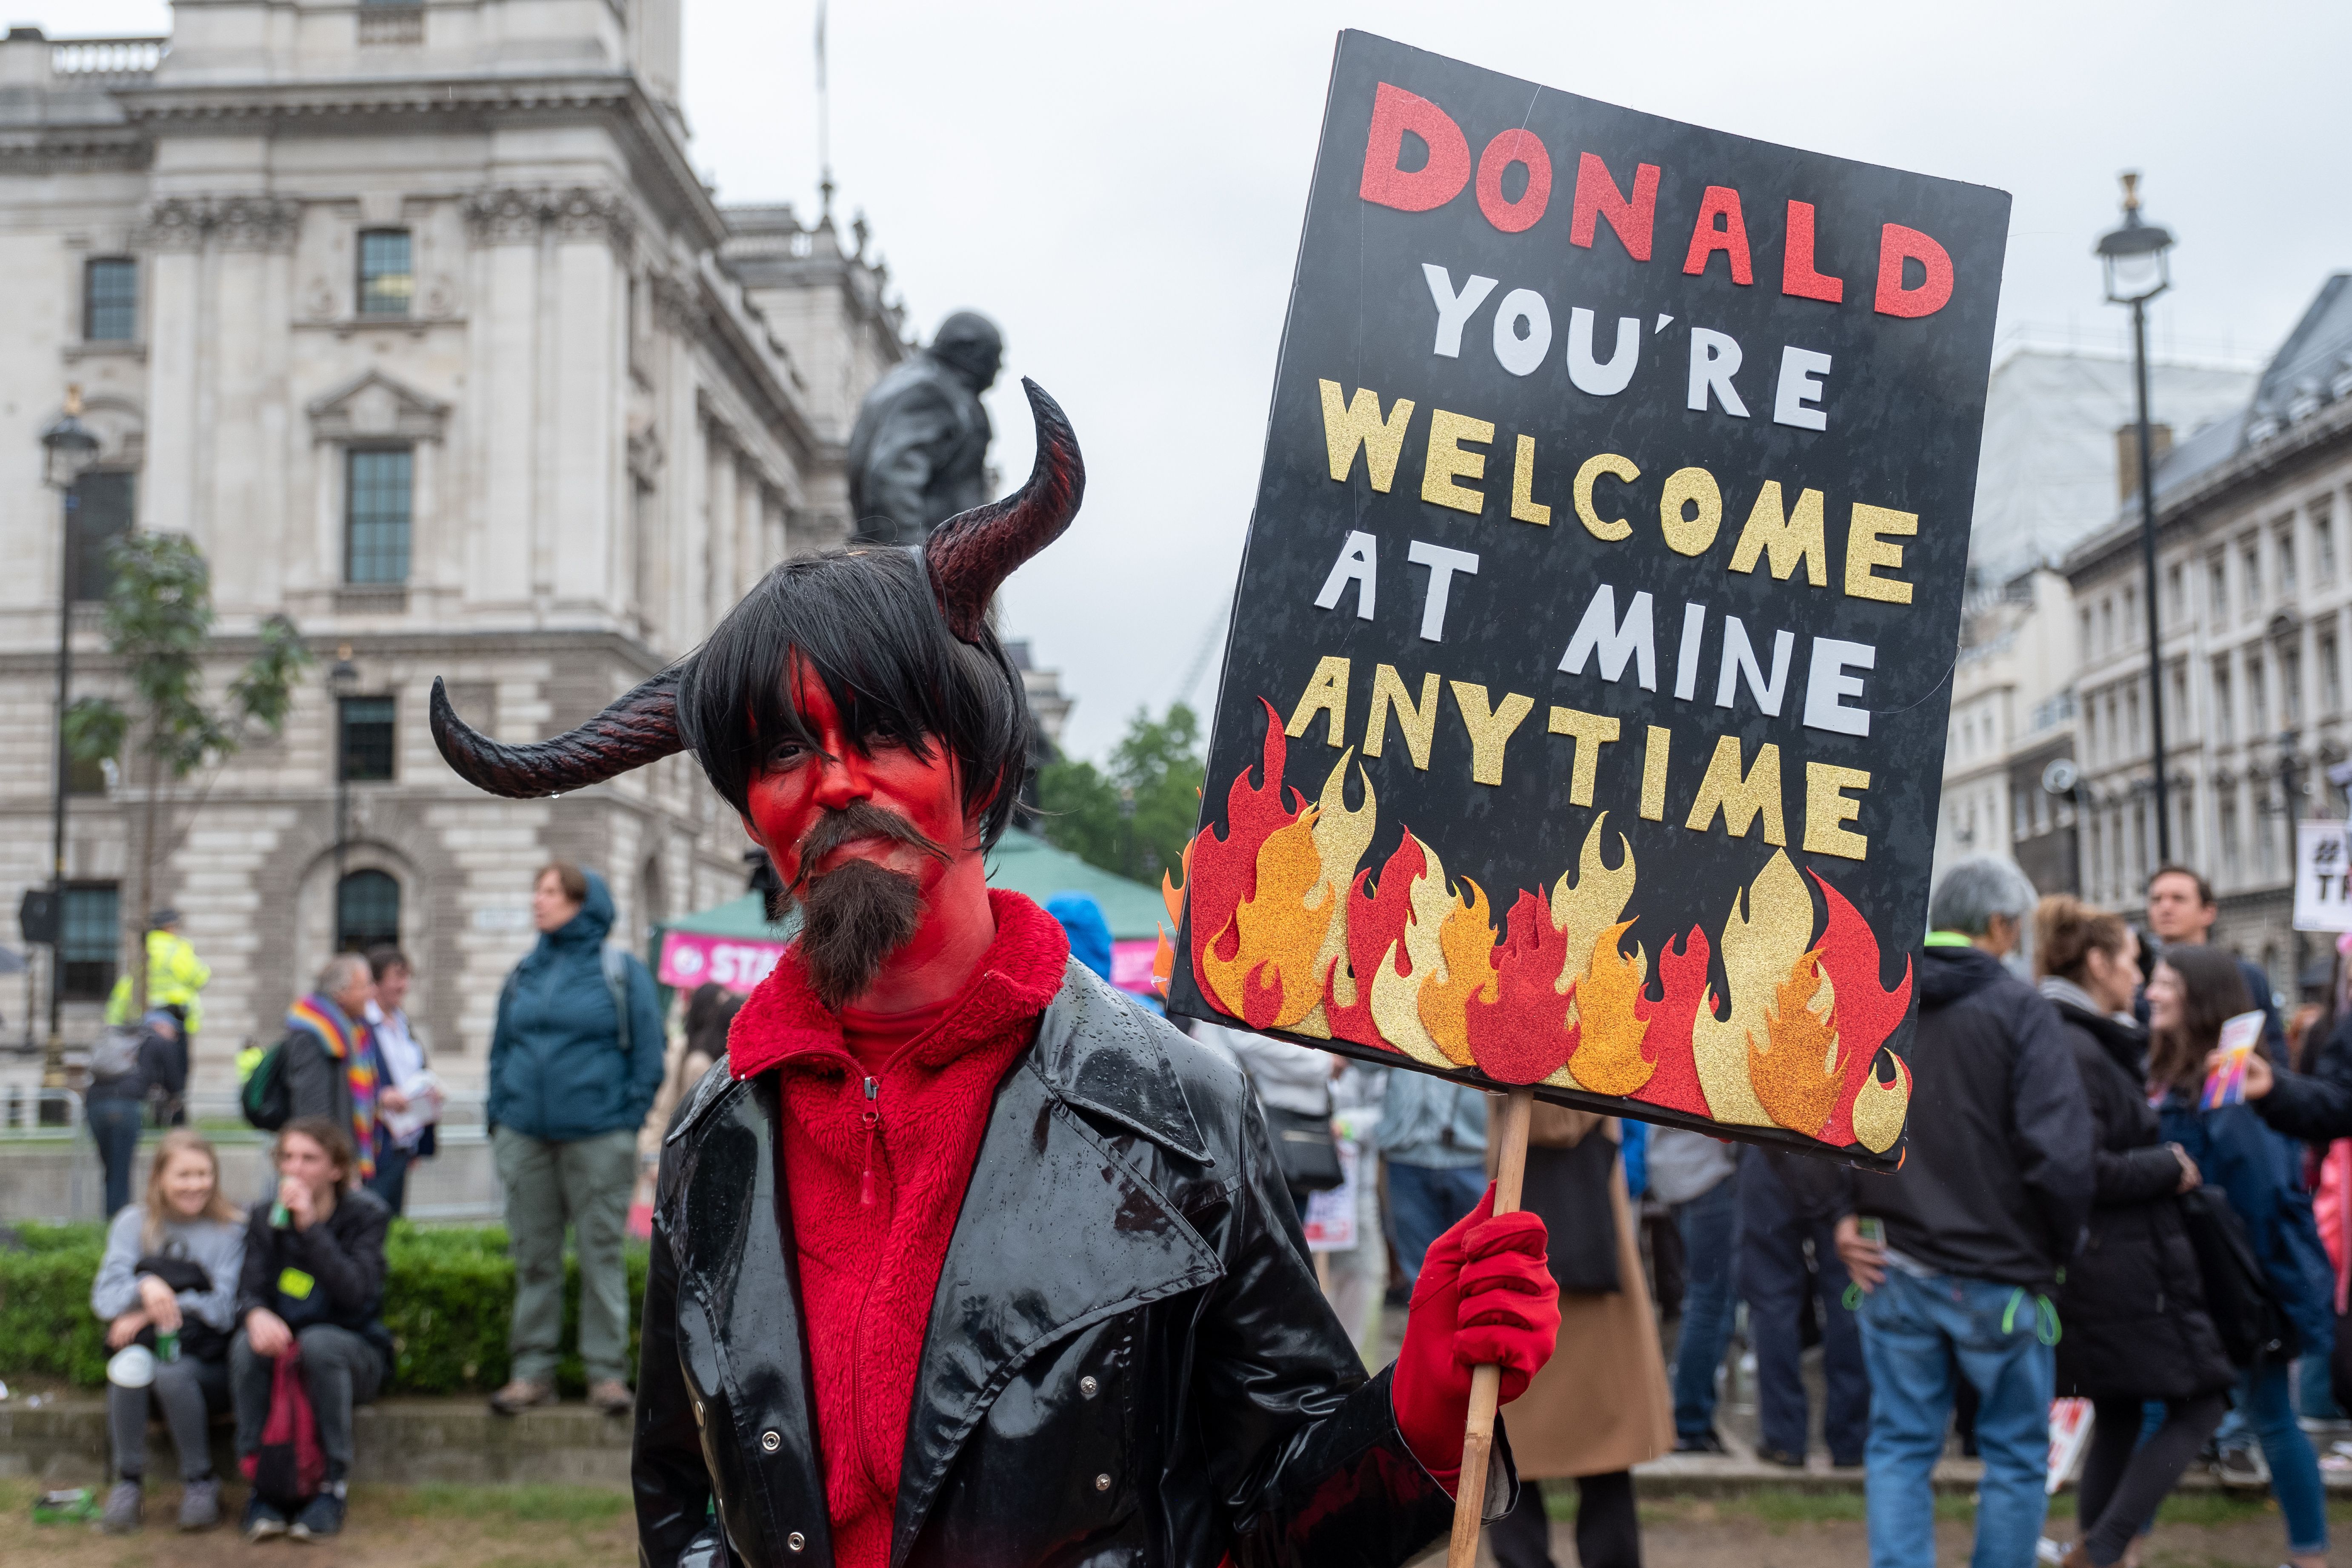 People protest against U.S President Donald Trump at Parliament Square in London, United Kingdom on June 4.